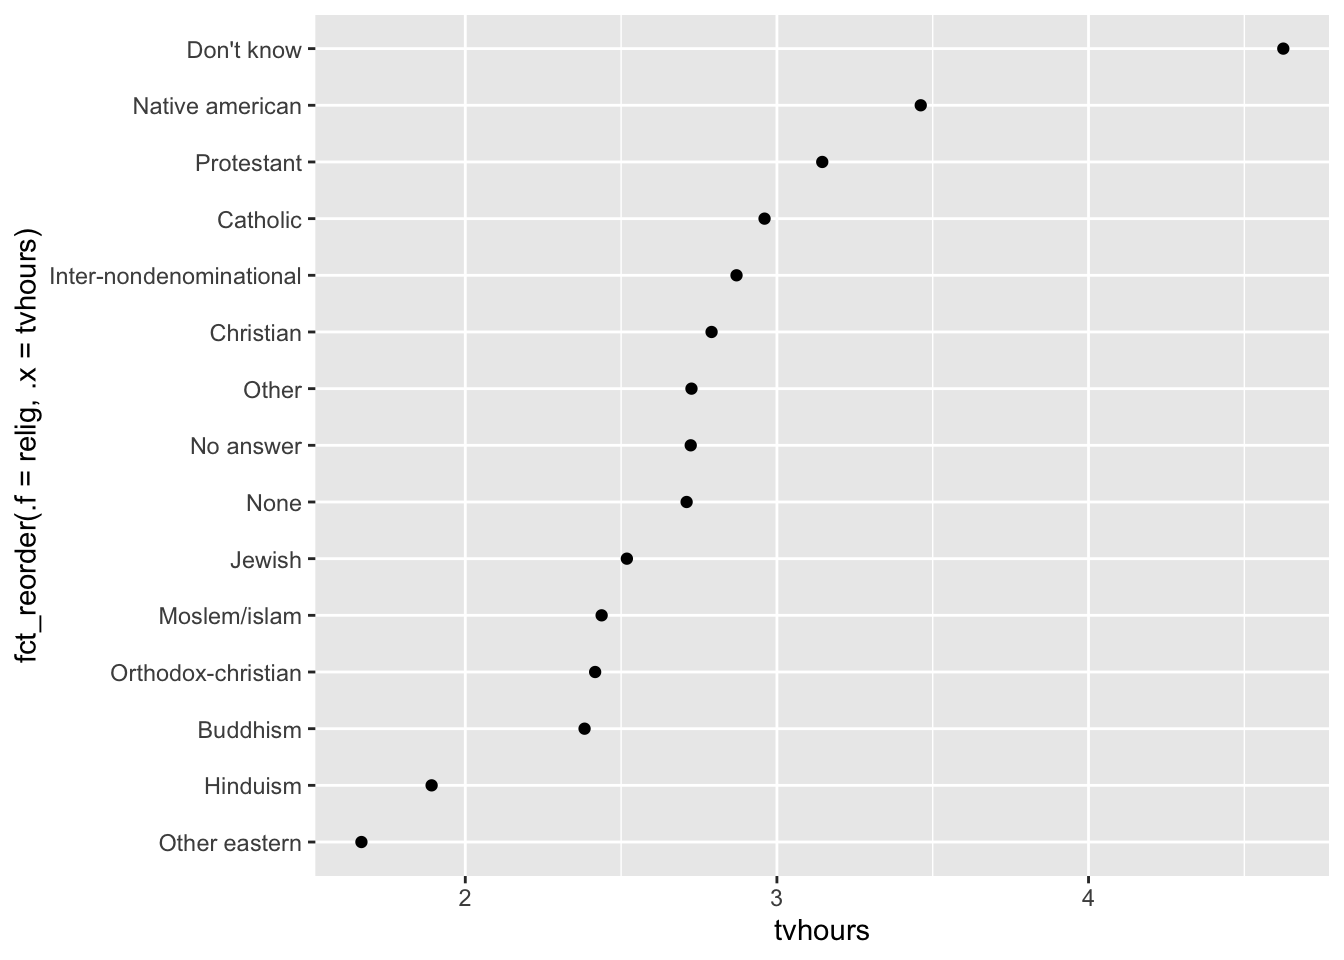 The same scatterplot as above, but now the religion is displayed in increasing order of tvhours. "Other eastern" has the fewest tvhours under 2, and "Don't know" has the highest (over 5).